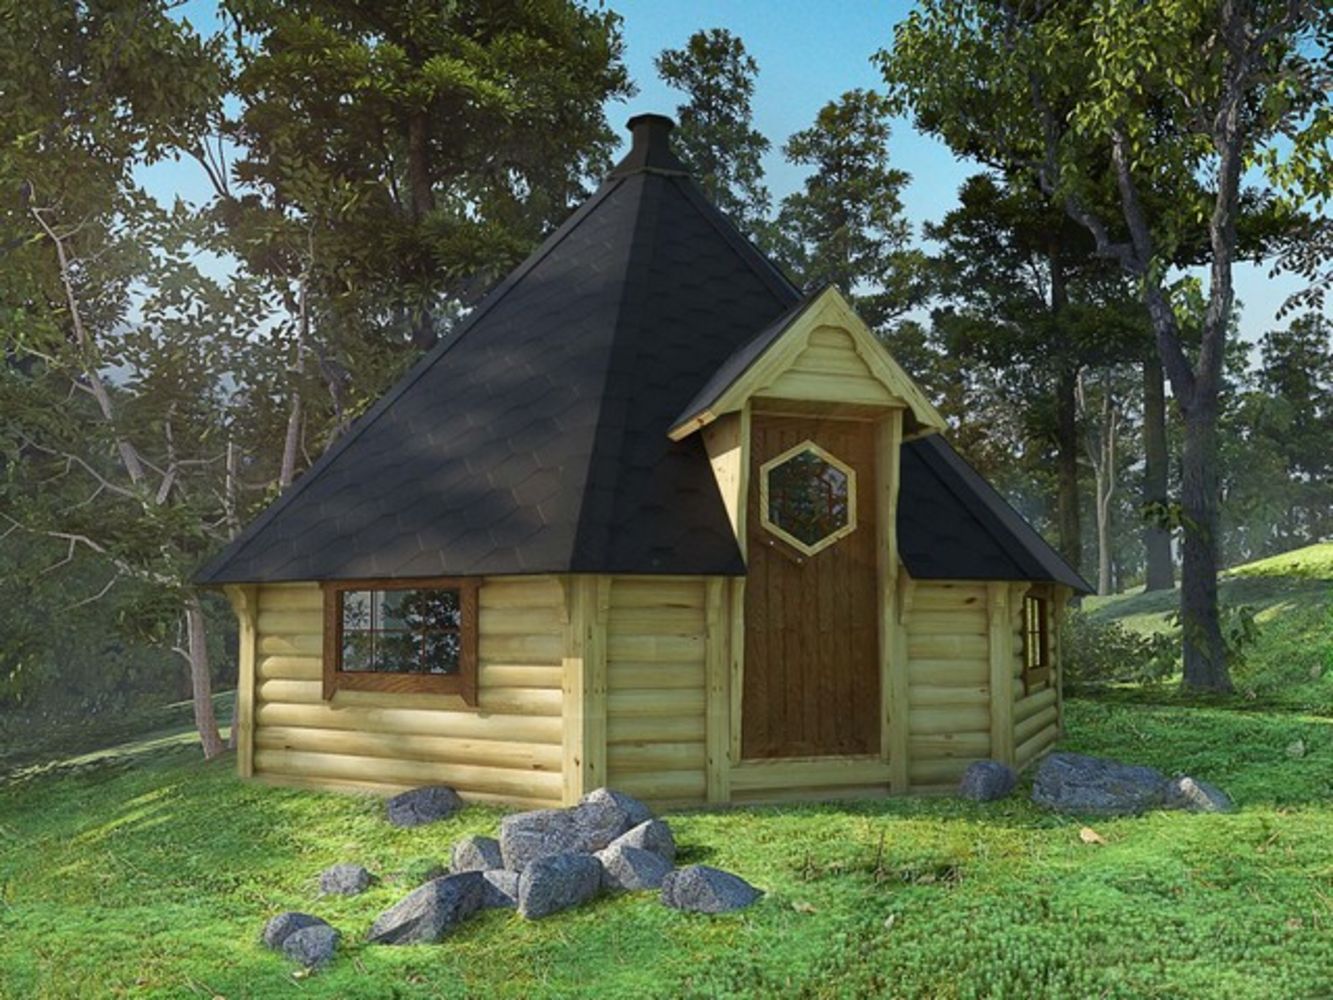 HUGE DISCOUNTS on Scandanavian Spruce Cabins, Hot Tubs, Garden Furniture MASSIVE SAVINGS ON MARKET PRICE, 6 to 8 weeks delivery.